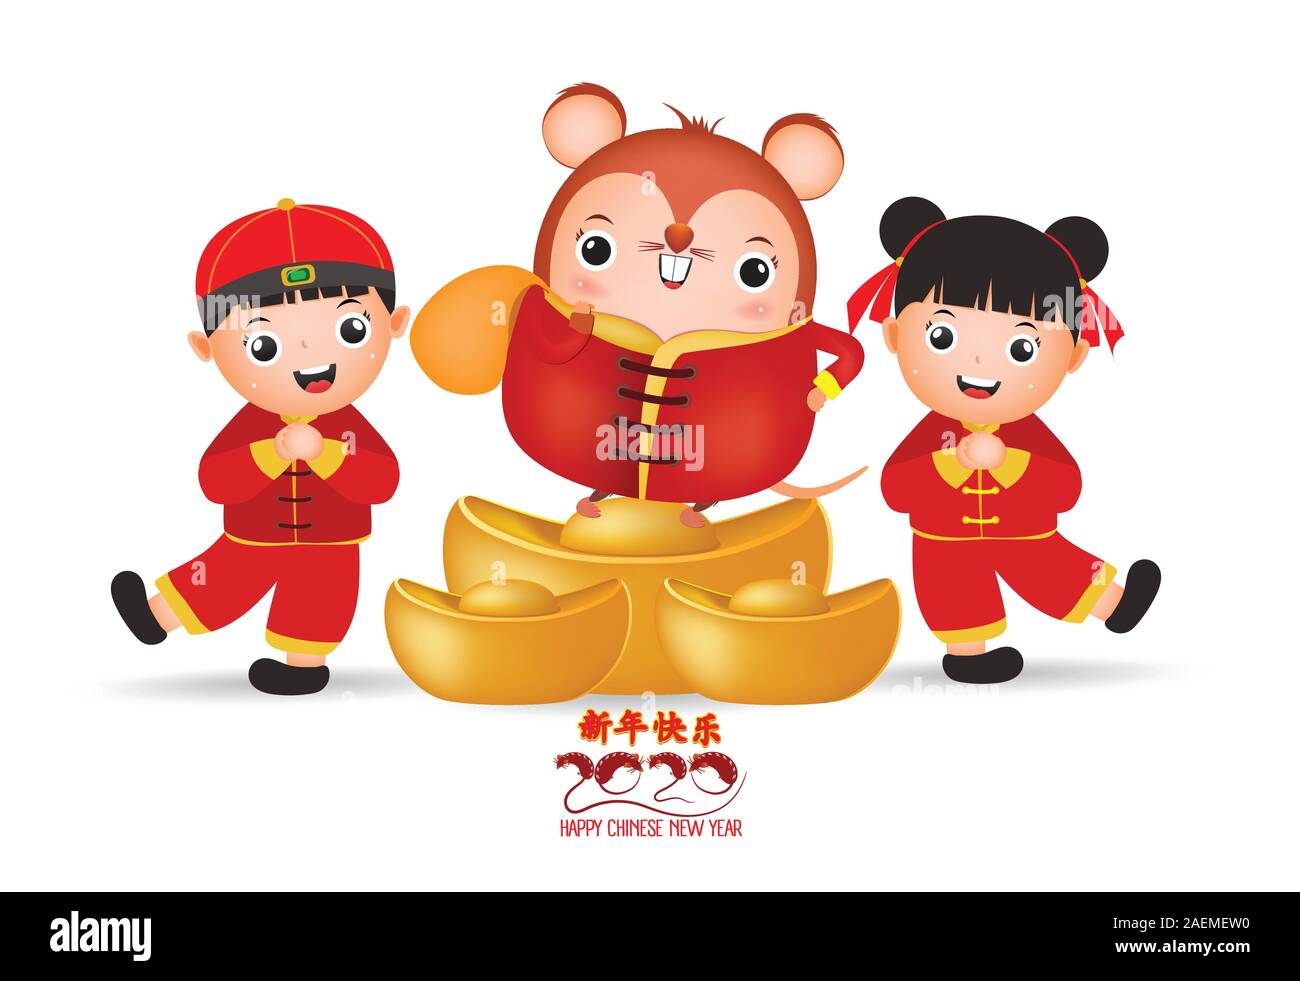 2020 Chinese new year - Year of the Rat. Set of cute cartoon rat ...